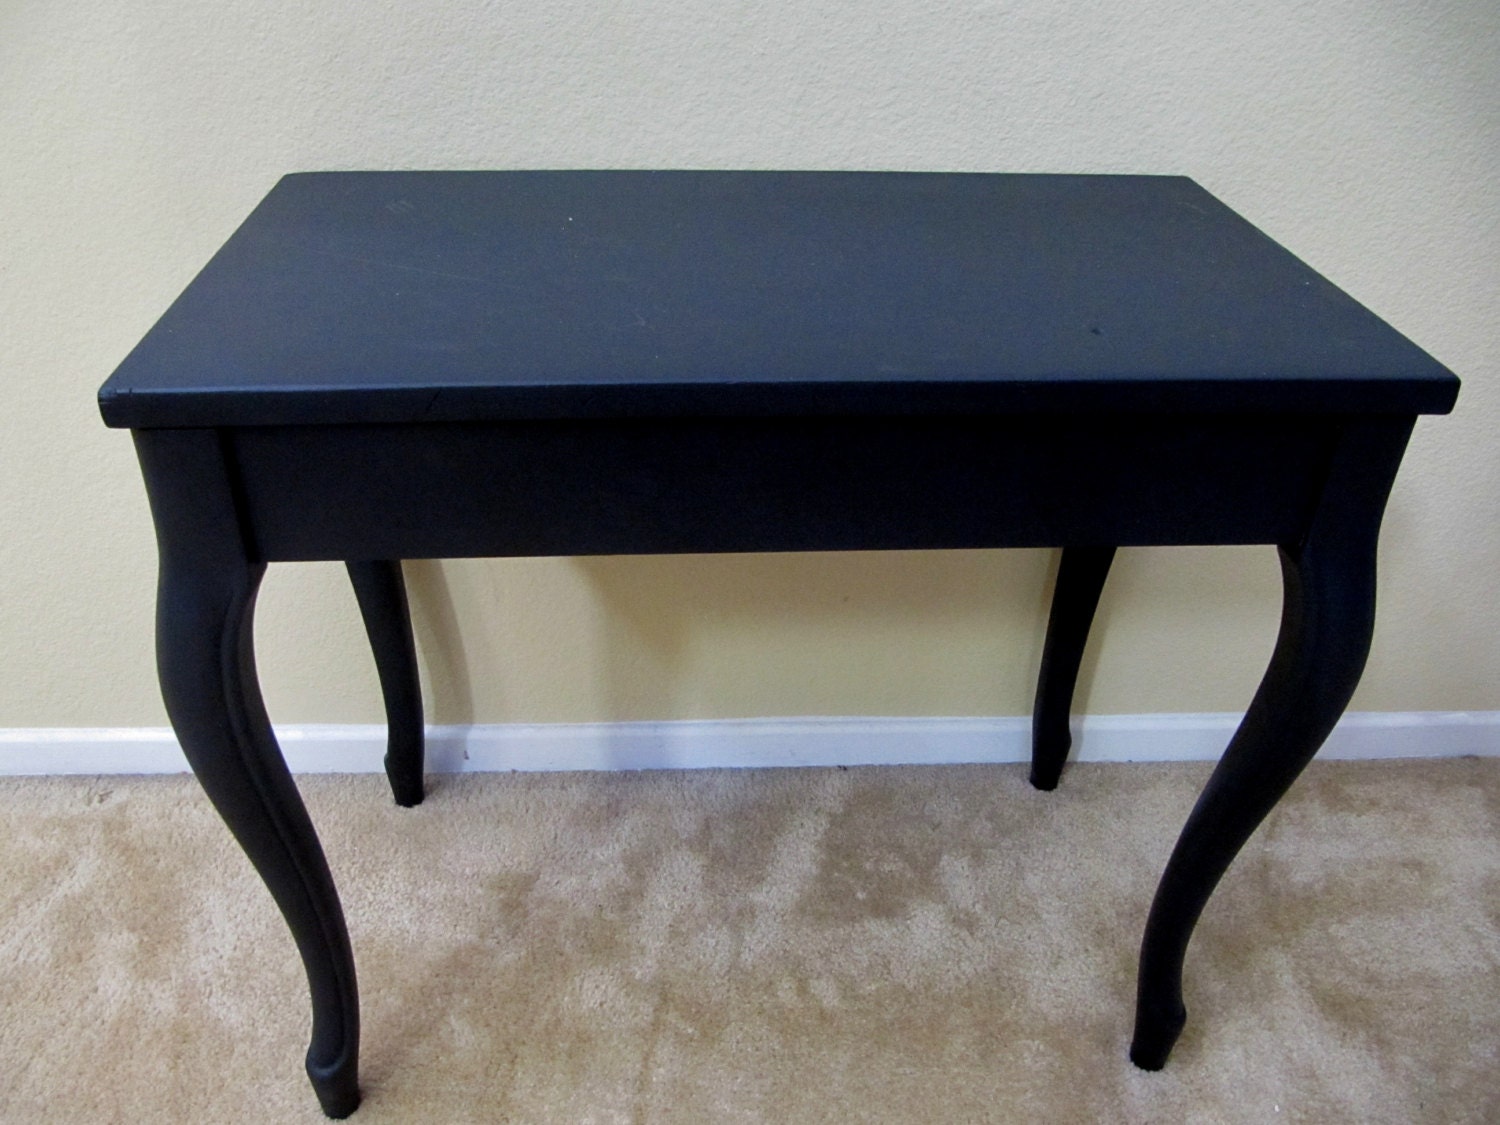 Popular items for end table on Etsy